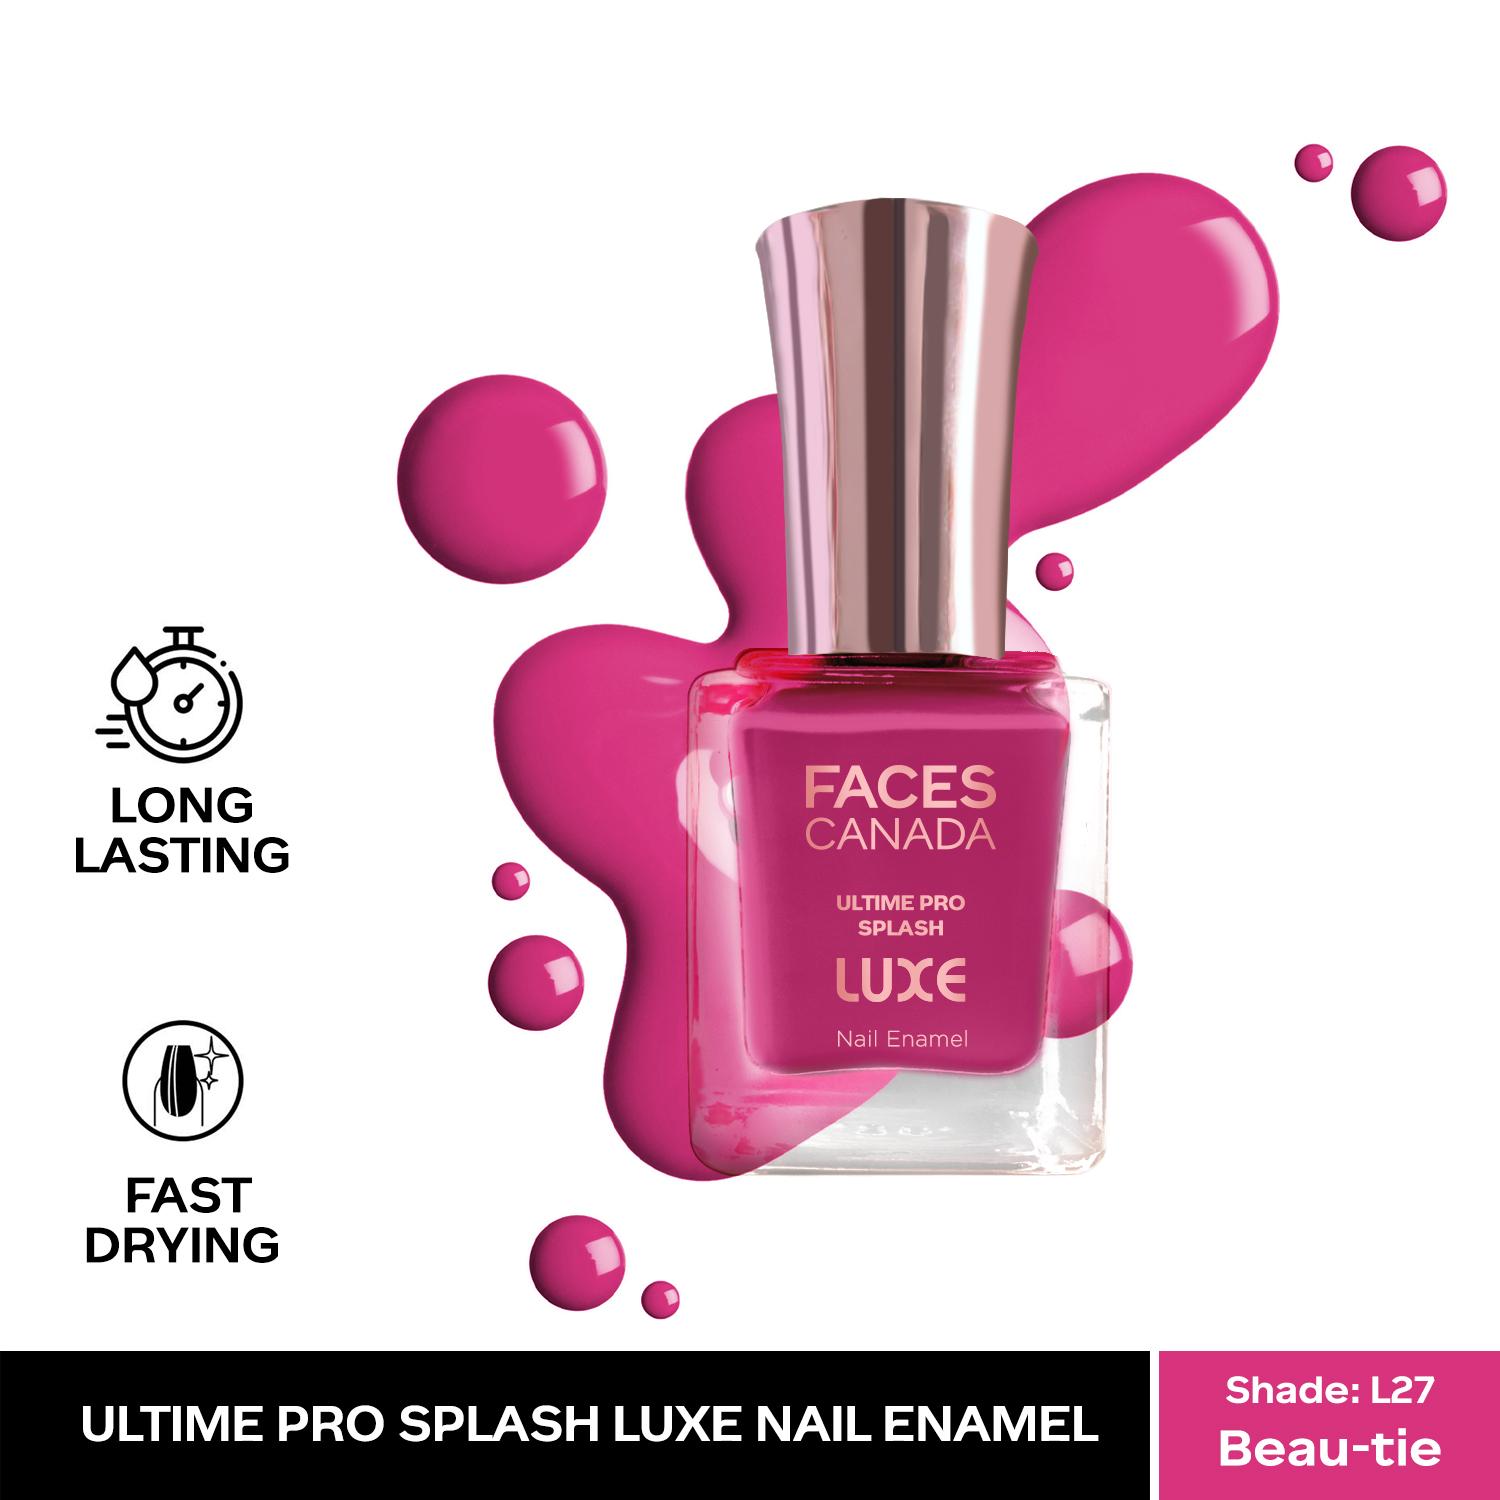 Faces Canada | Faces Canada Ultime Pro Splash Luxe Nail Enamel - Beau-tie (L27), Glossy Finish (12 ml)